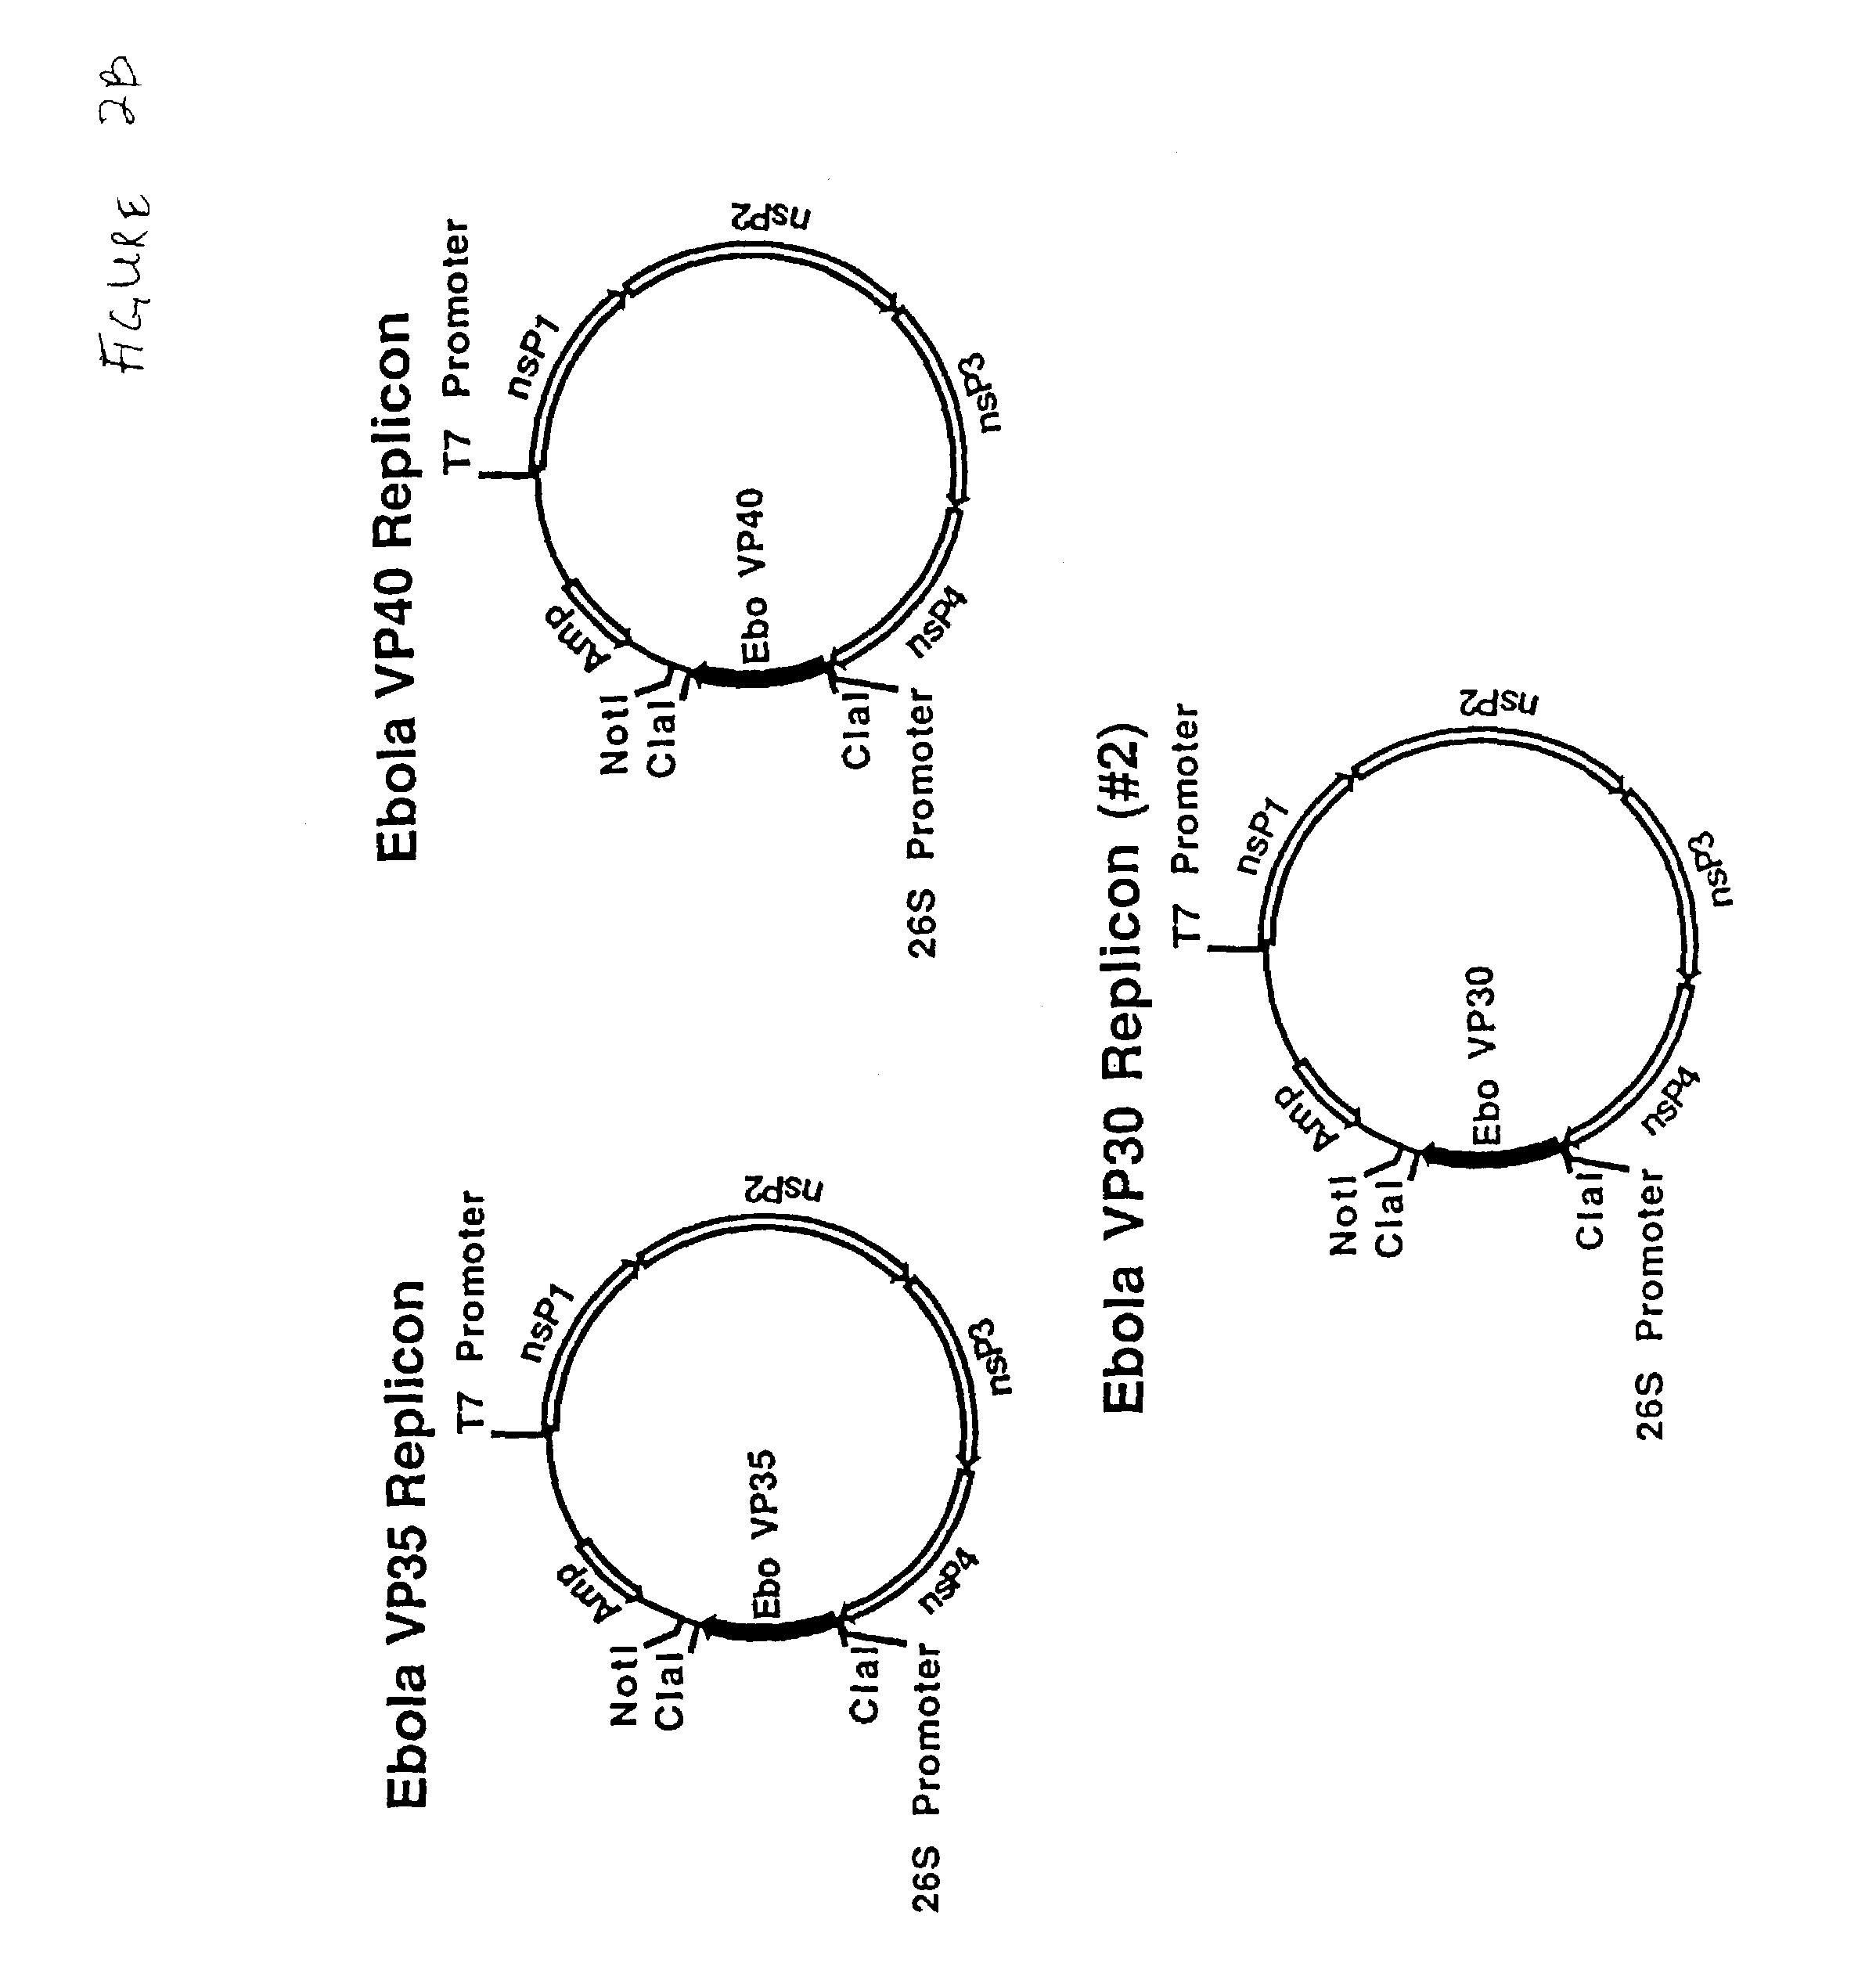 Ebola peptides and immunogenic compositions containing same